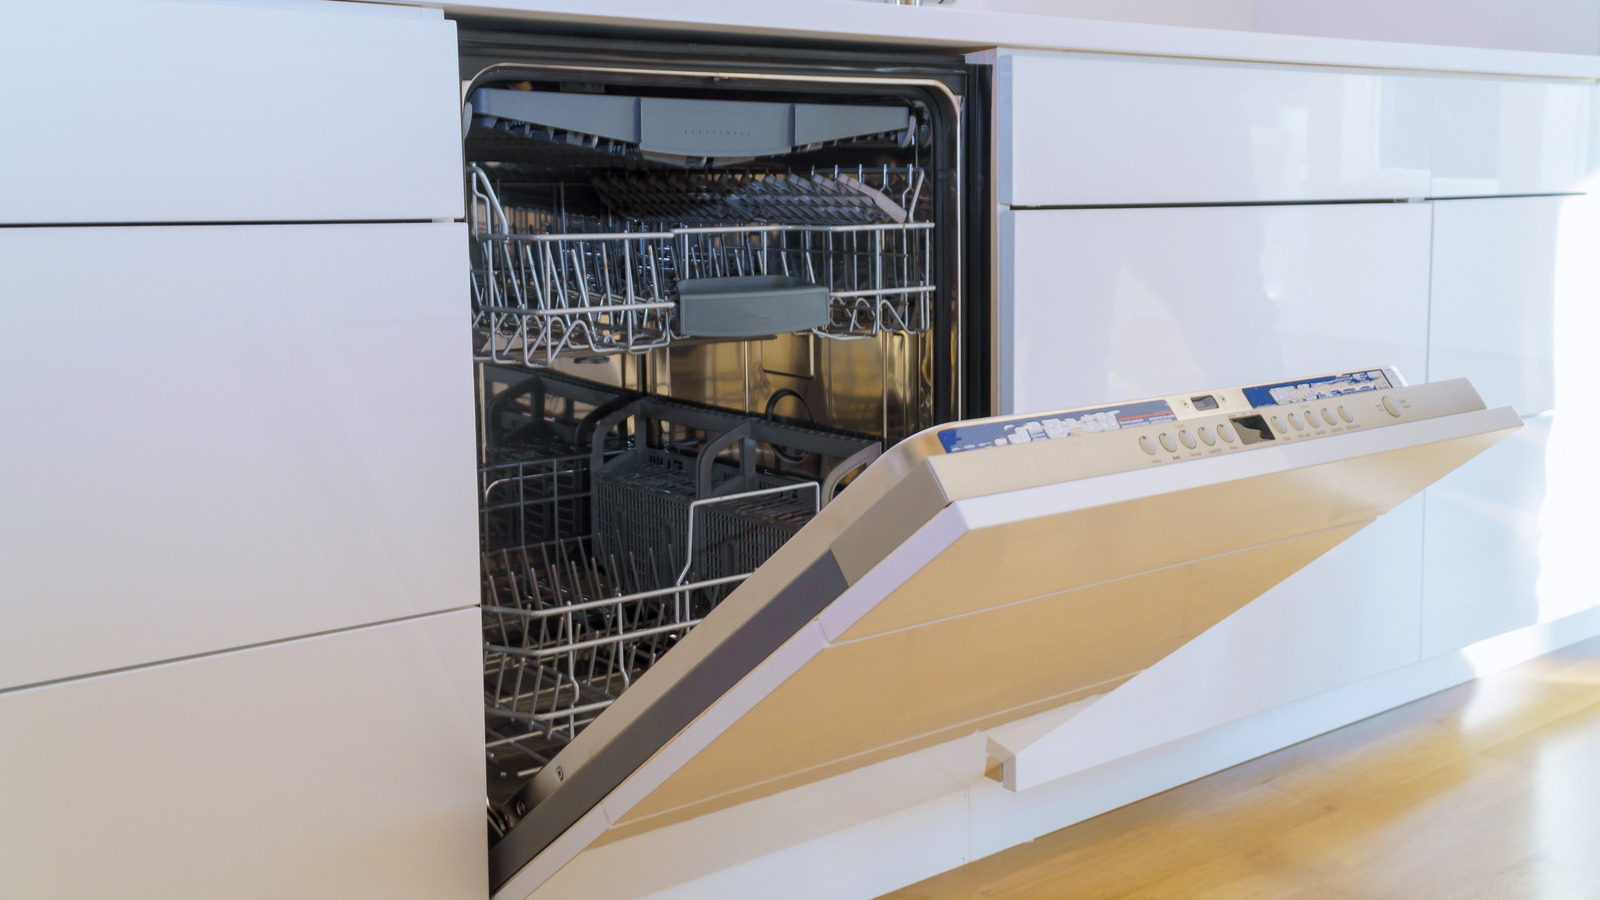 How Much Does A Dishwasher Cost